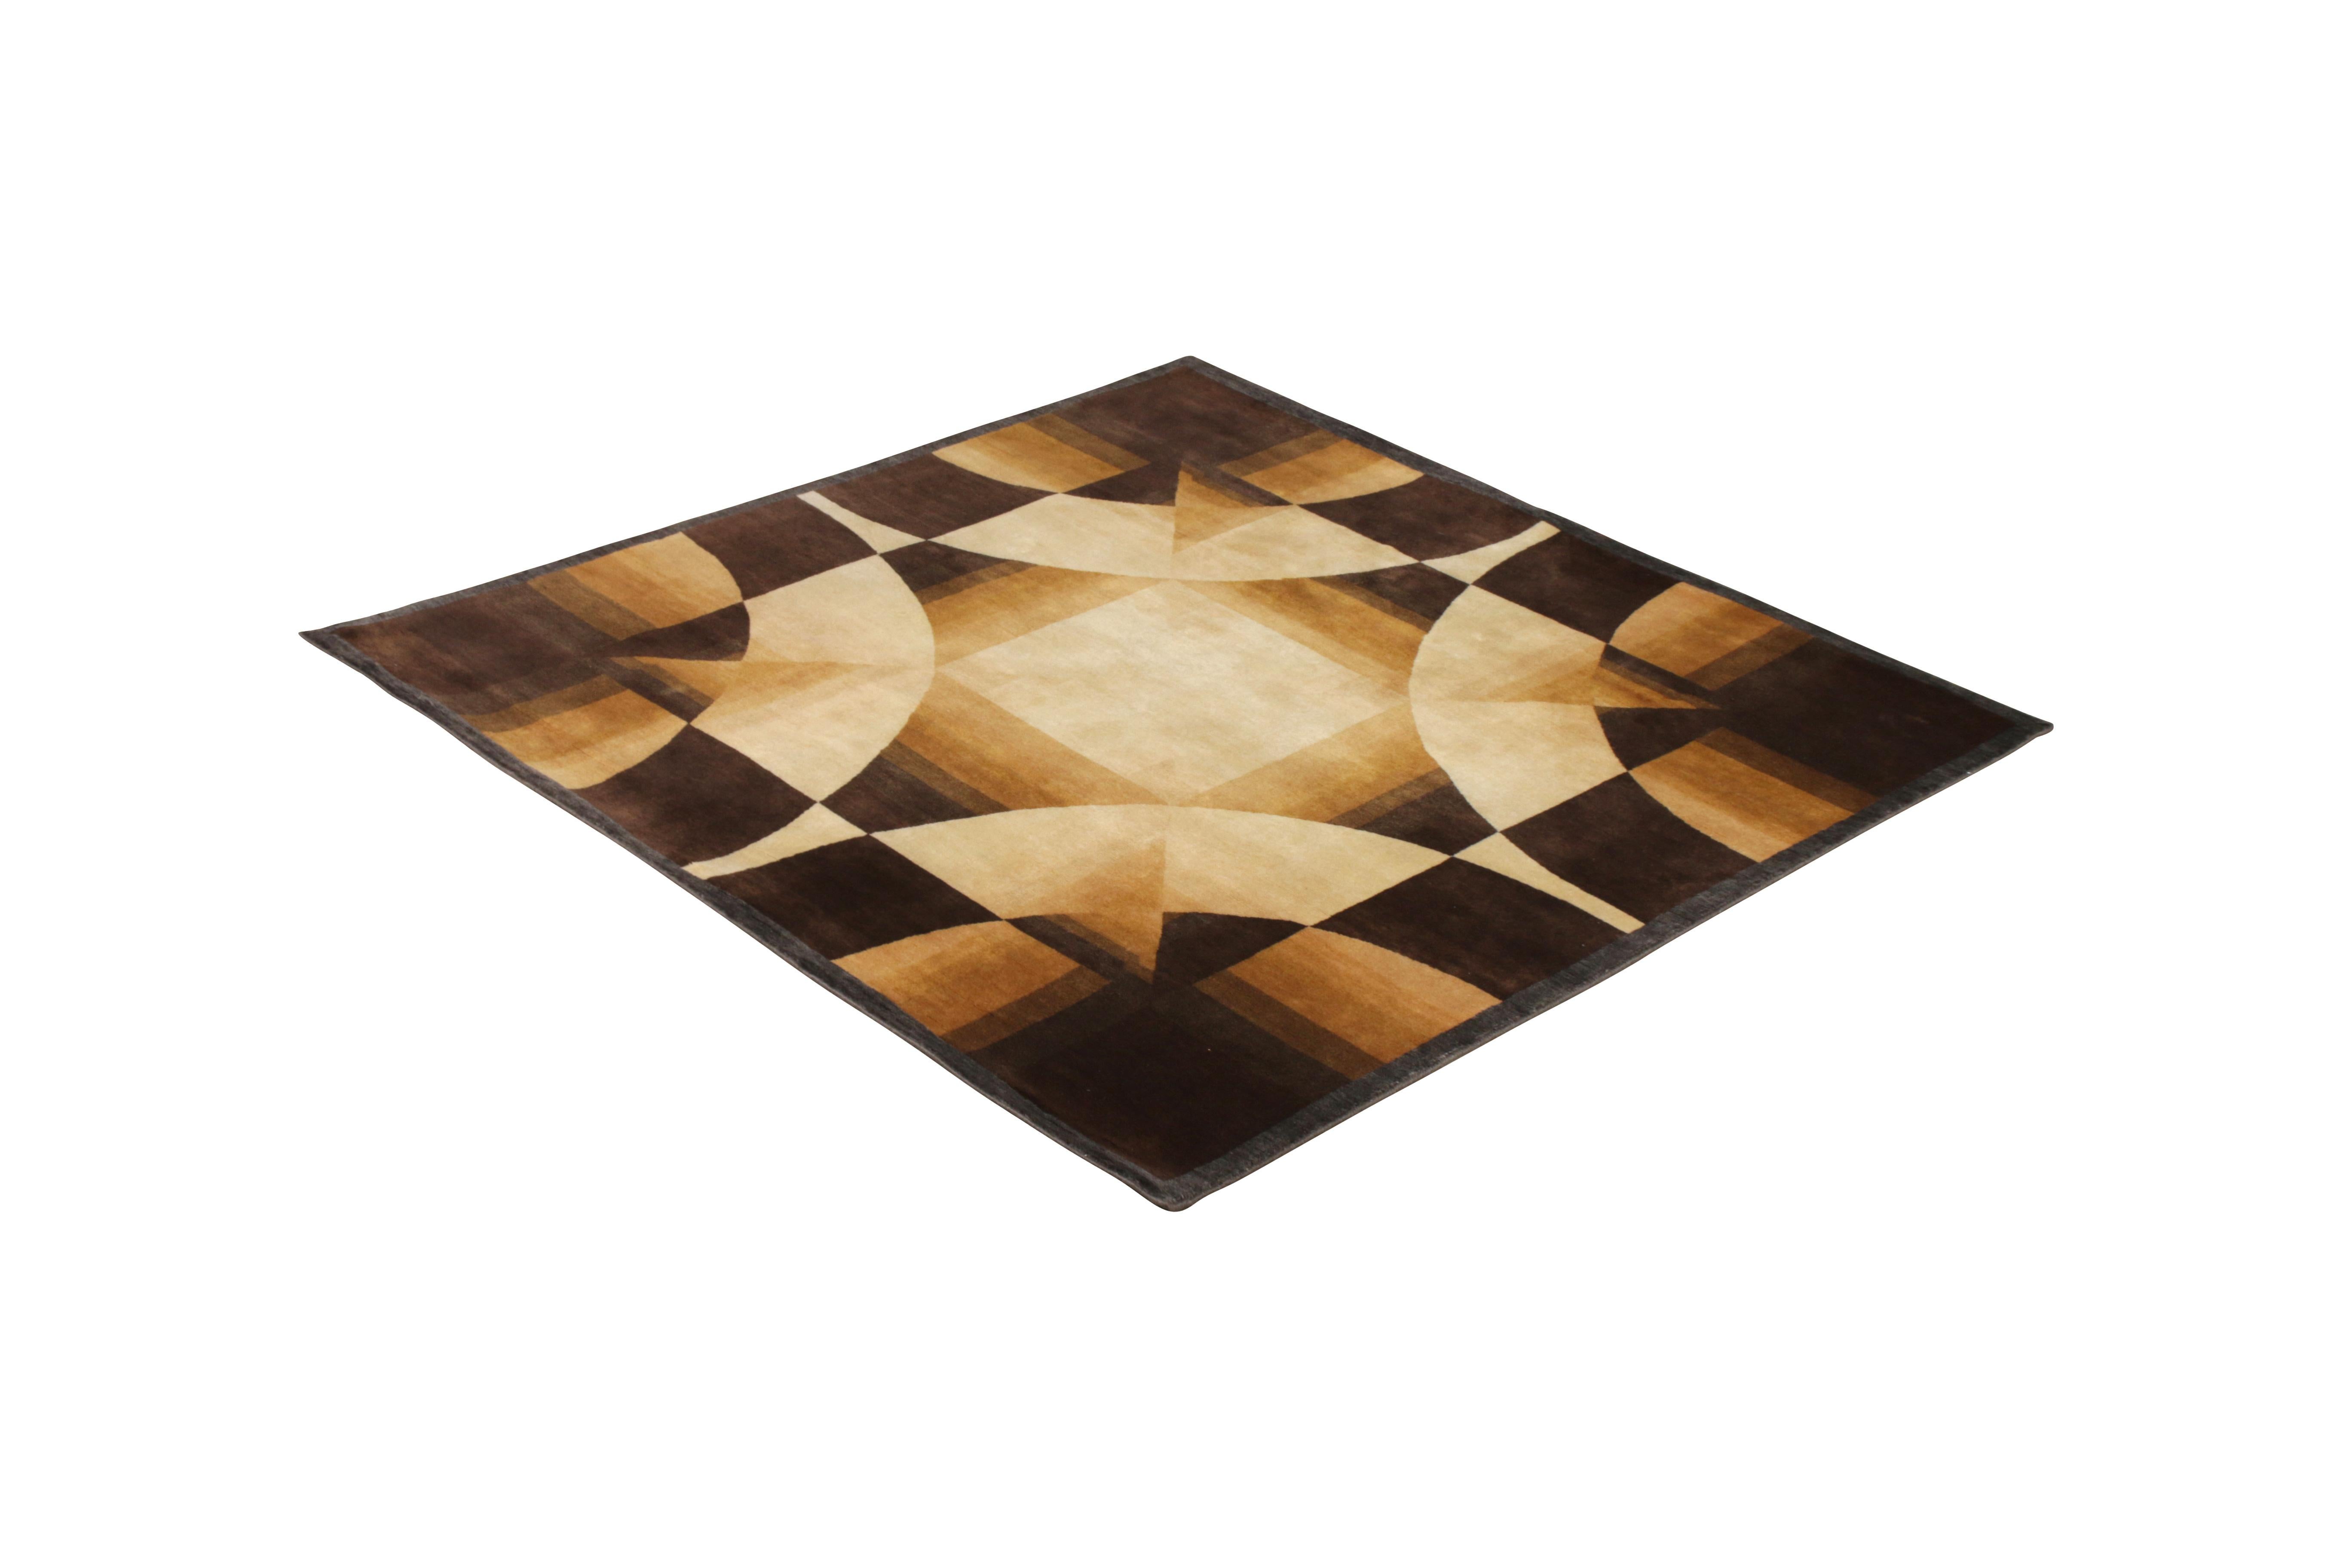 Hand-knotted in wool and all-natural silk, this 6×6 rug is a new addition to the Art Deco rug collection by Rug & Kilim.

The silk’s natural sheen brings out both this remarkable attention to detail as well as the inviting texture in kind, playing